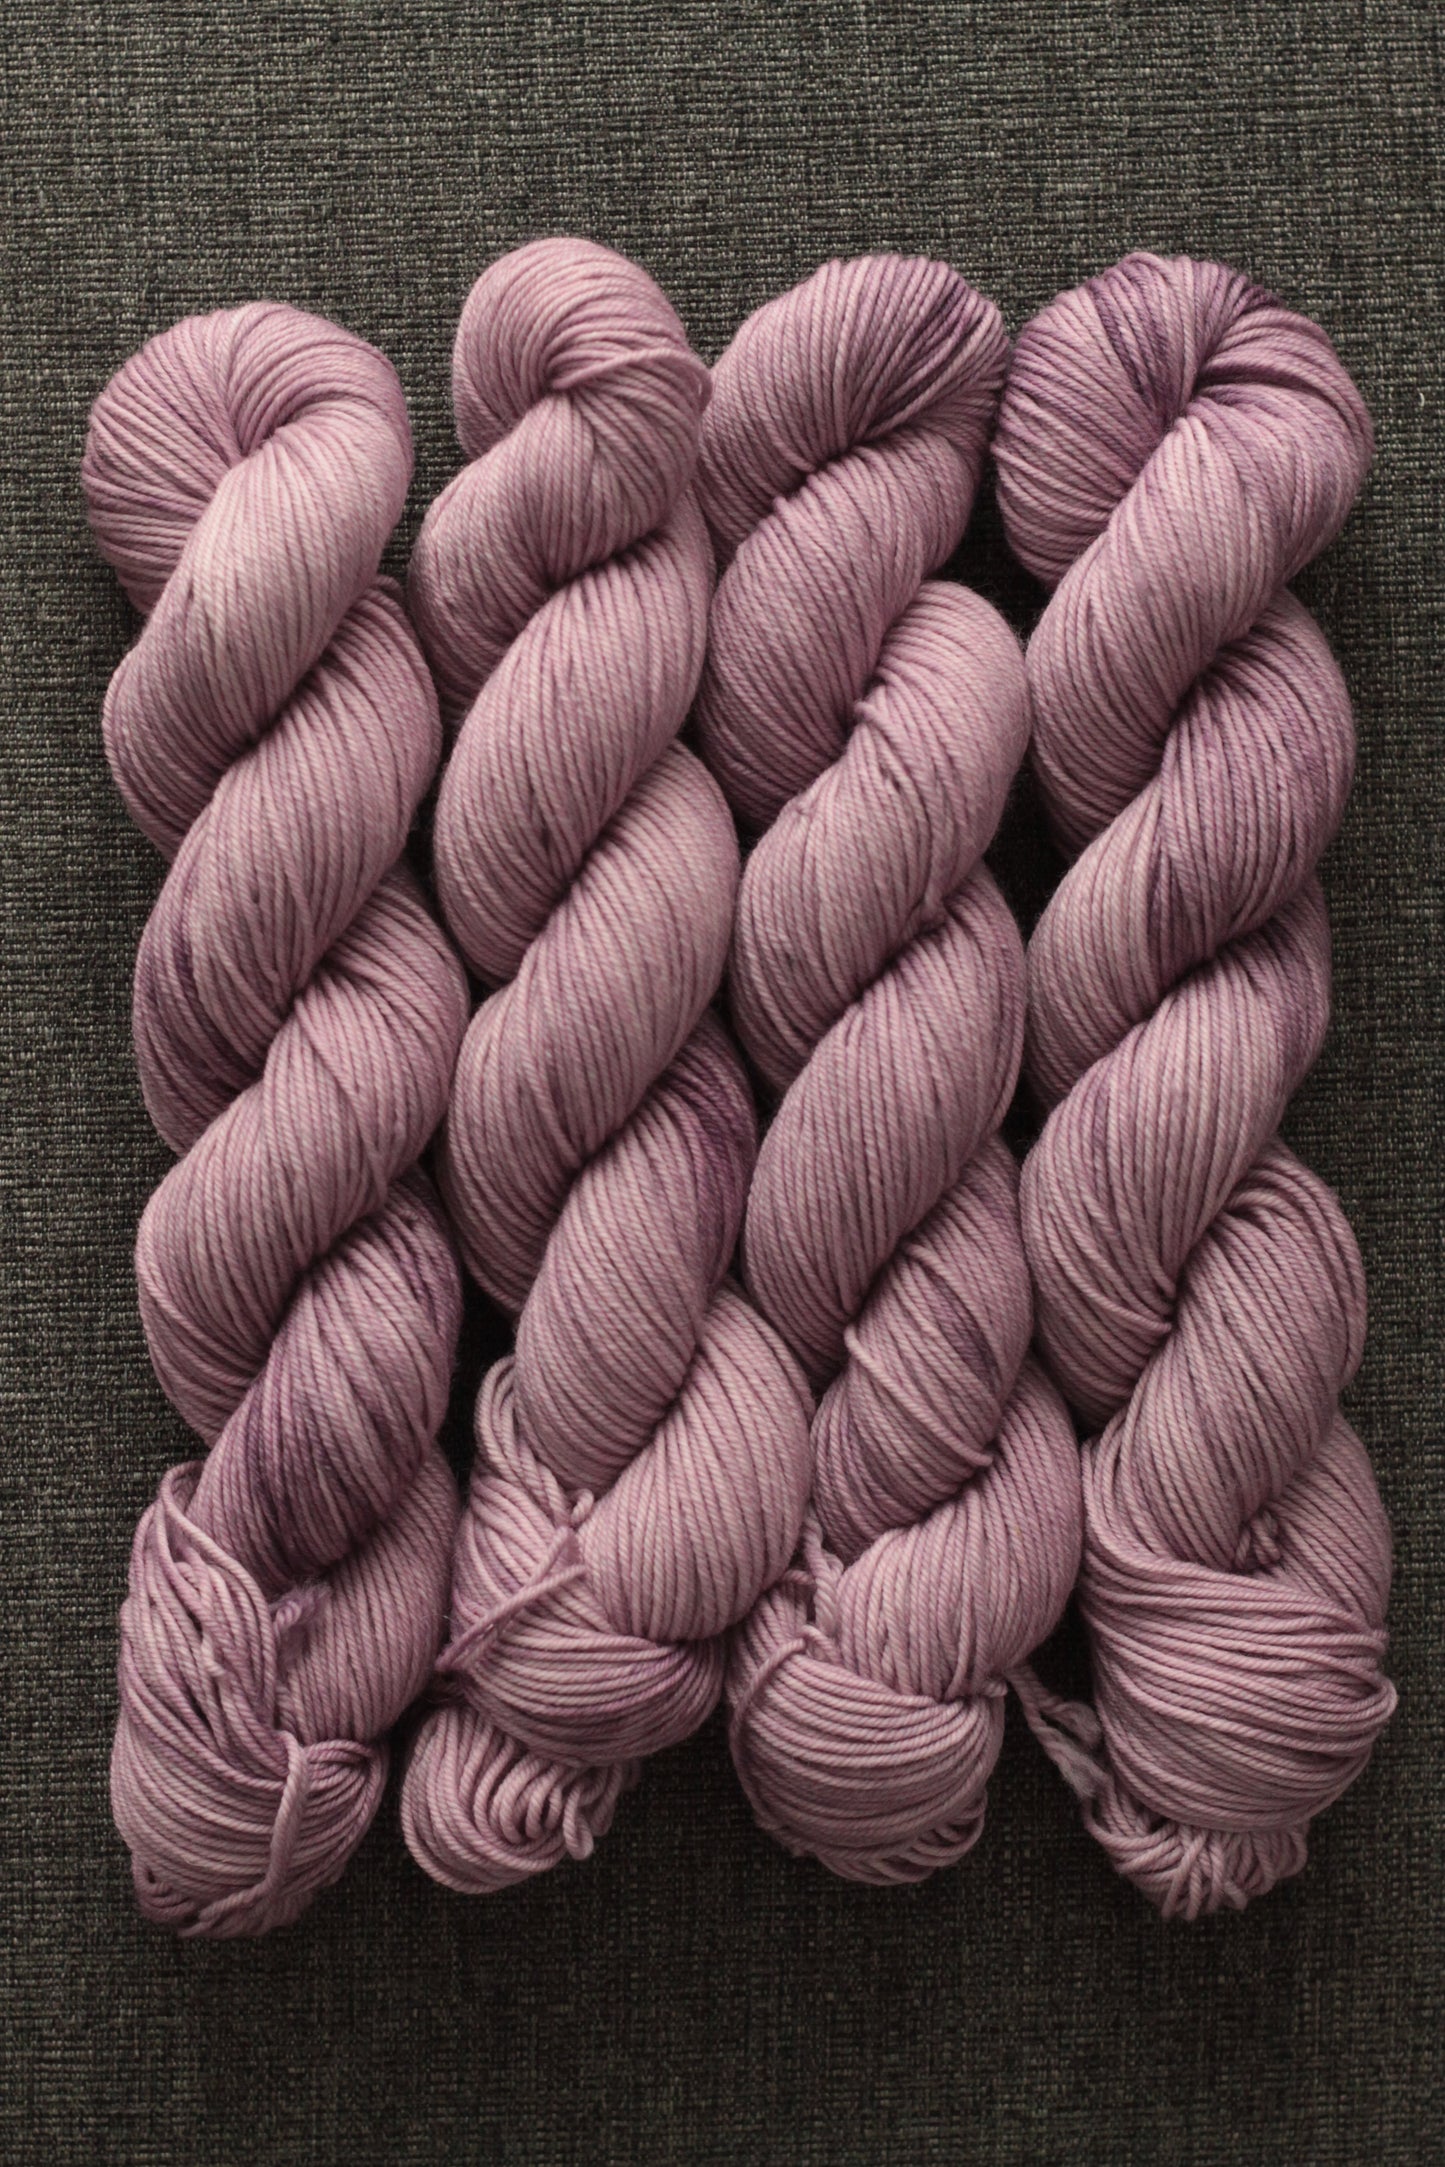 Leftovers - Organic Worsted